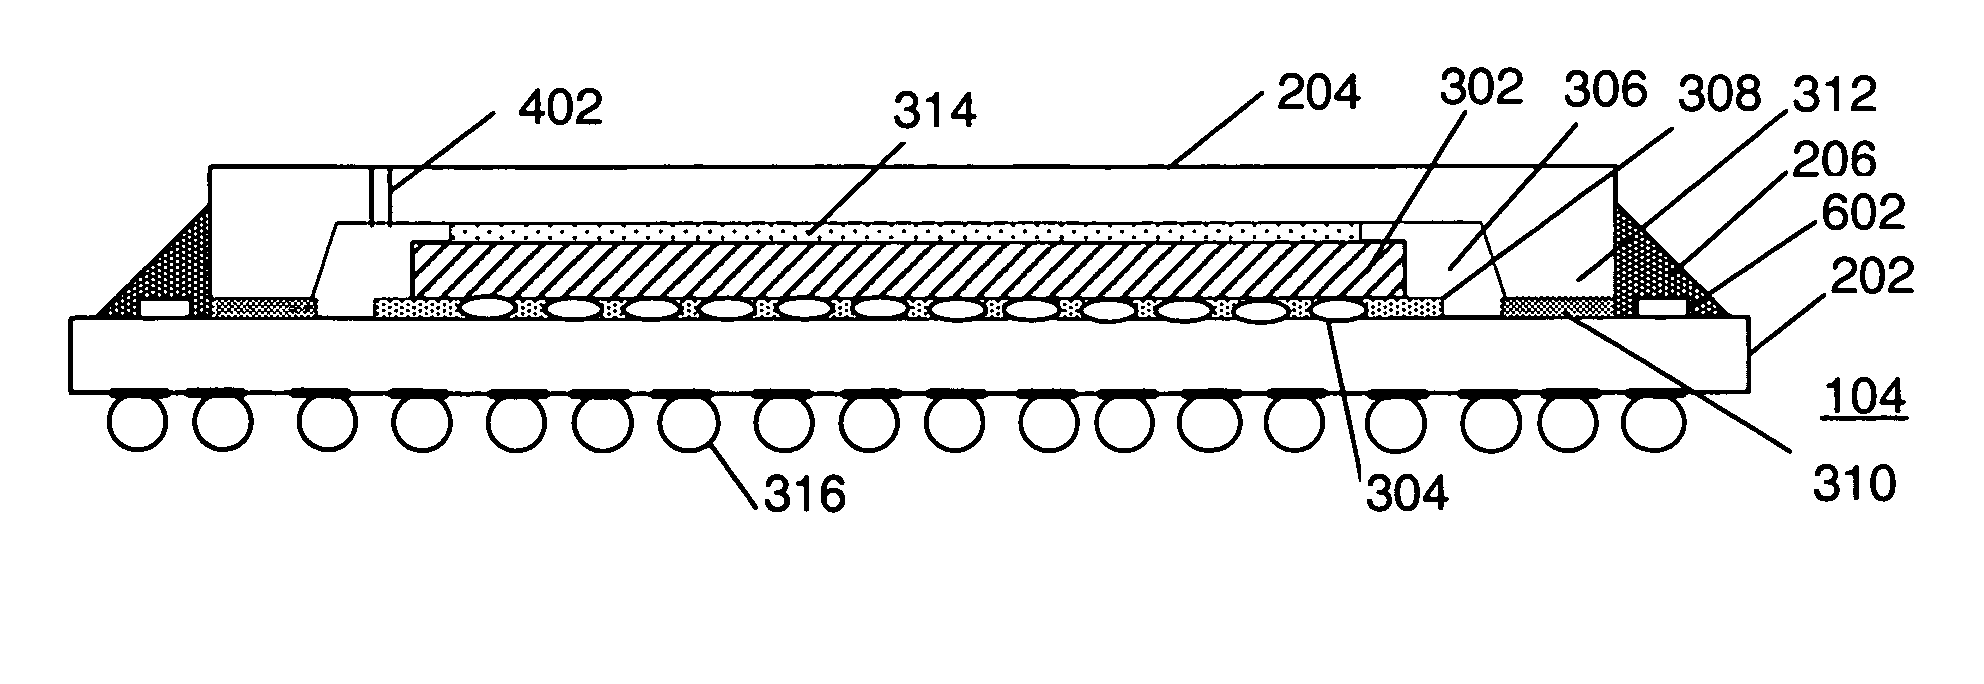 Integrated circuit having a lid and method of employing a lid on an integrated circuit